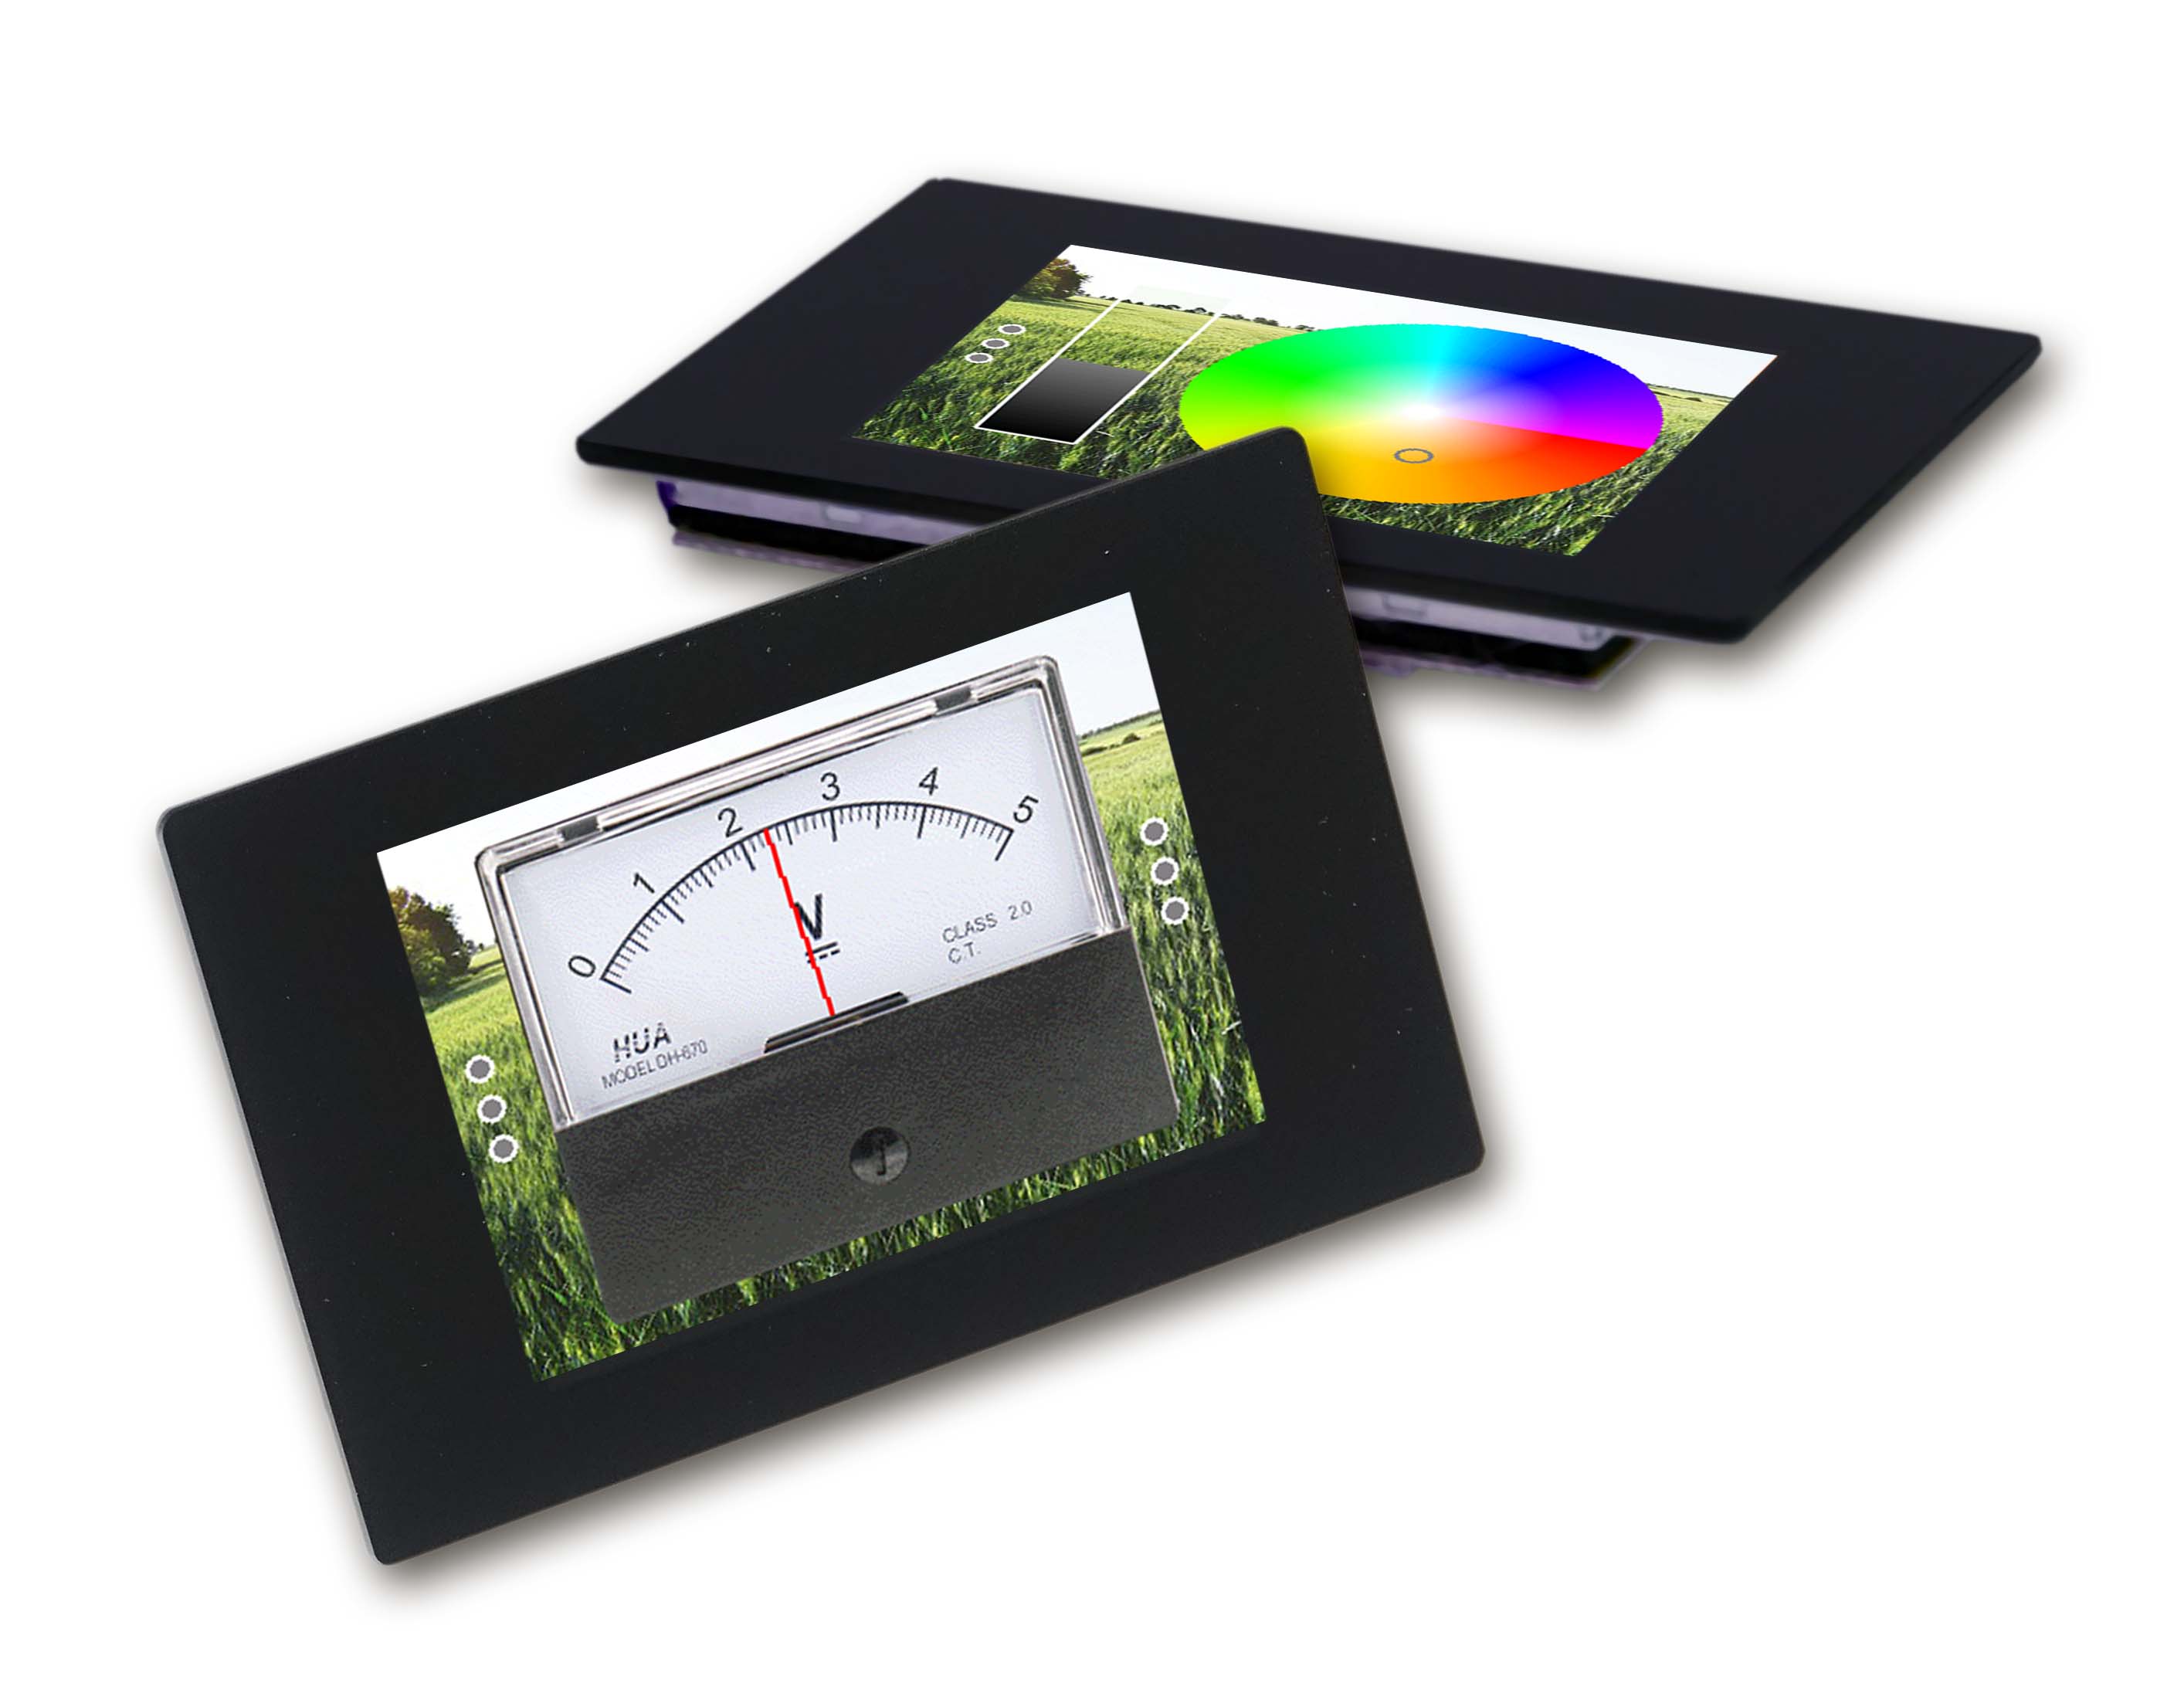 Intelligent TFT displays for home automation for display, control and regulation